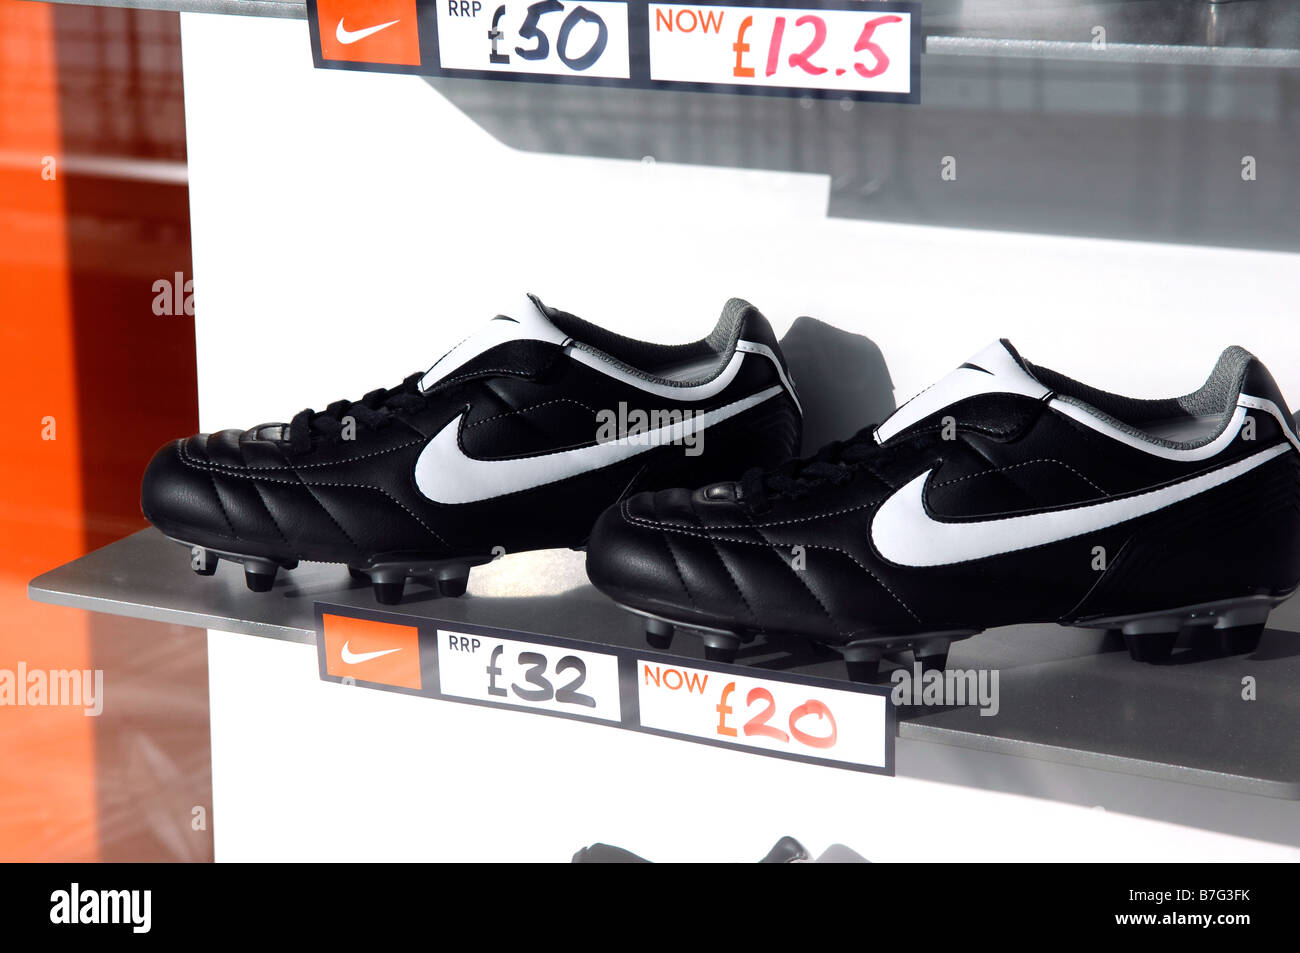 nike footwear football boots soccer shoes window display reduced american  company fashion retail shop store niketown Stock Photo - Alamy